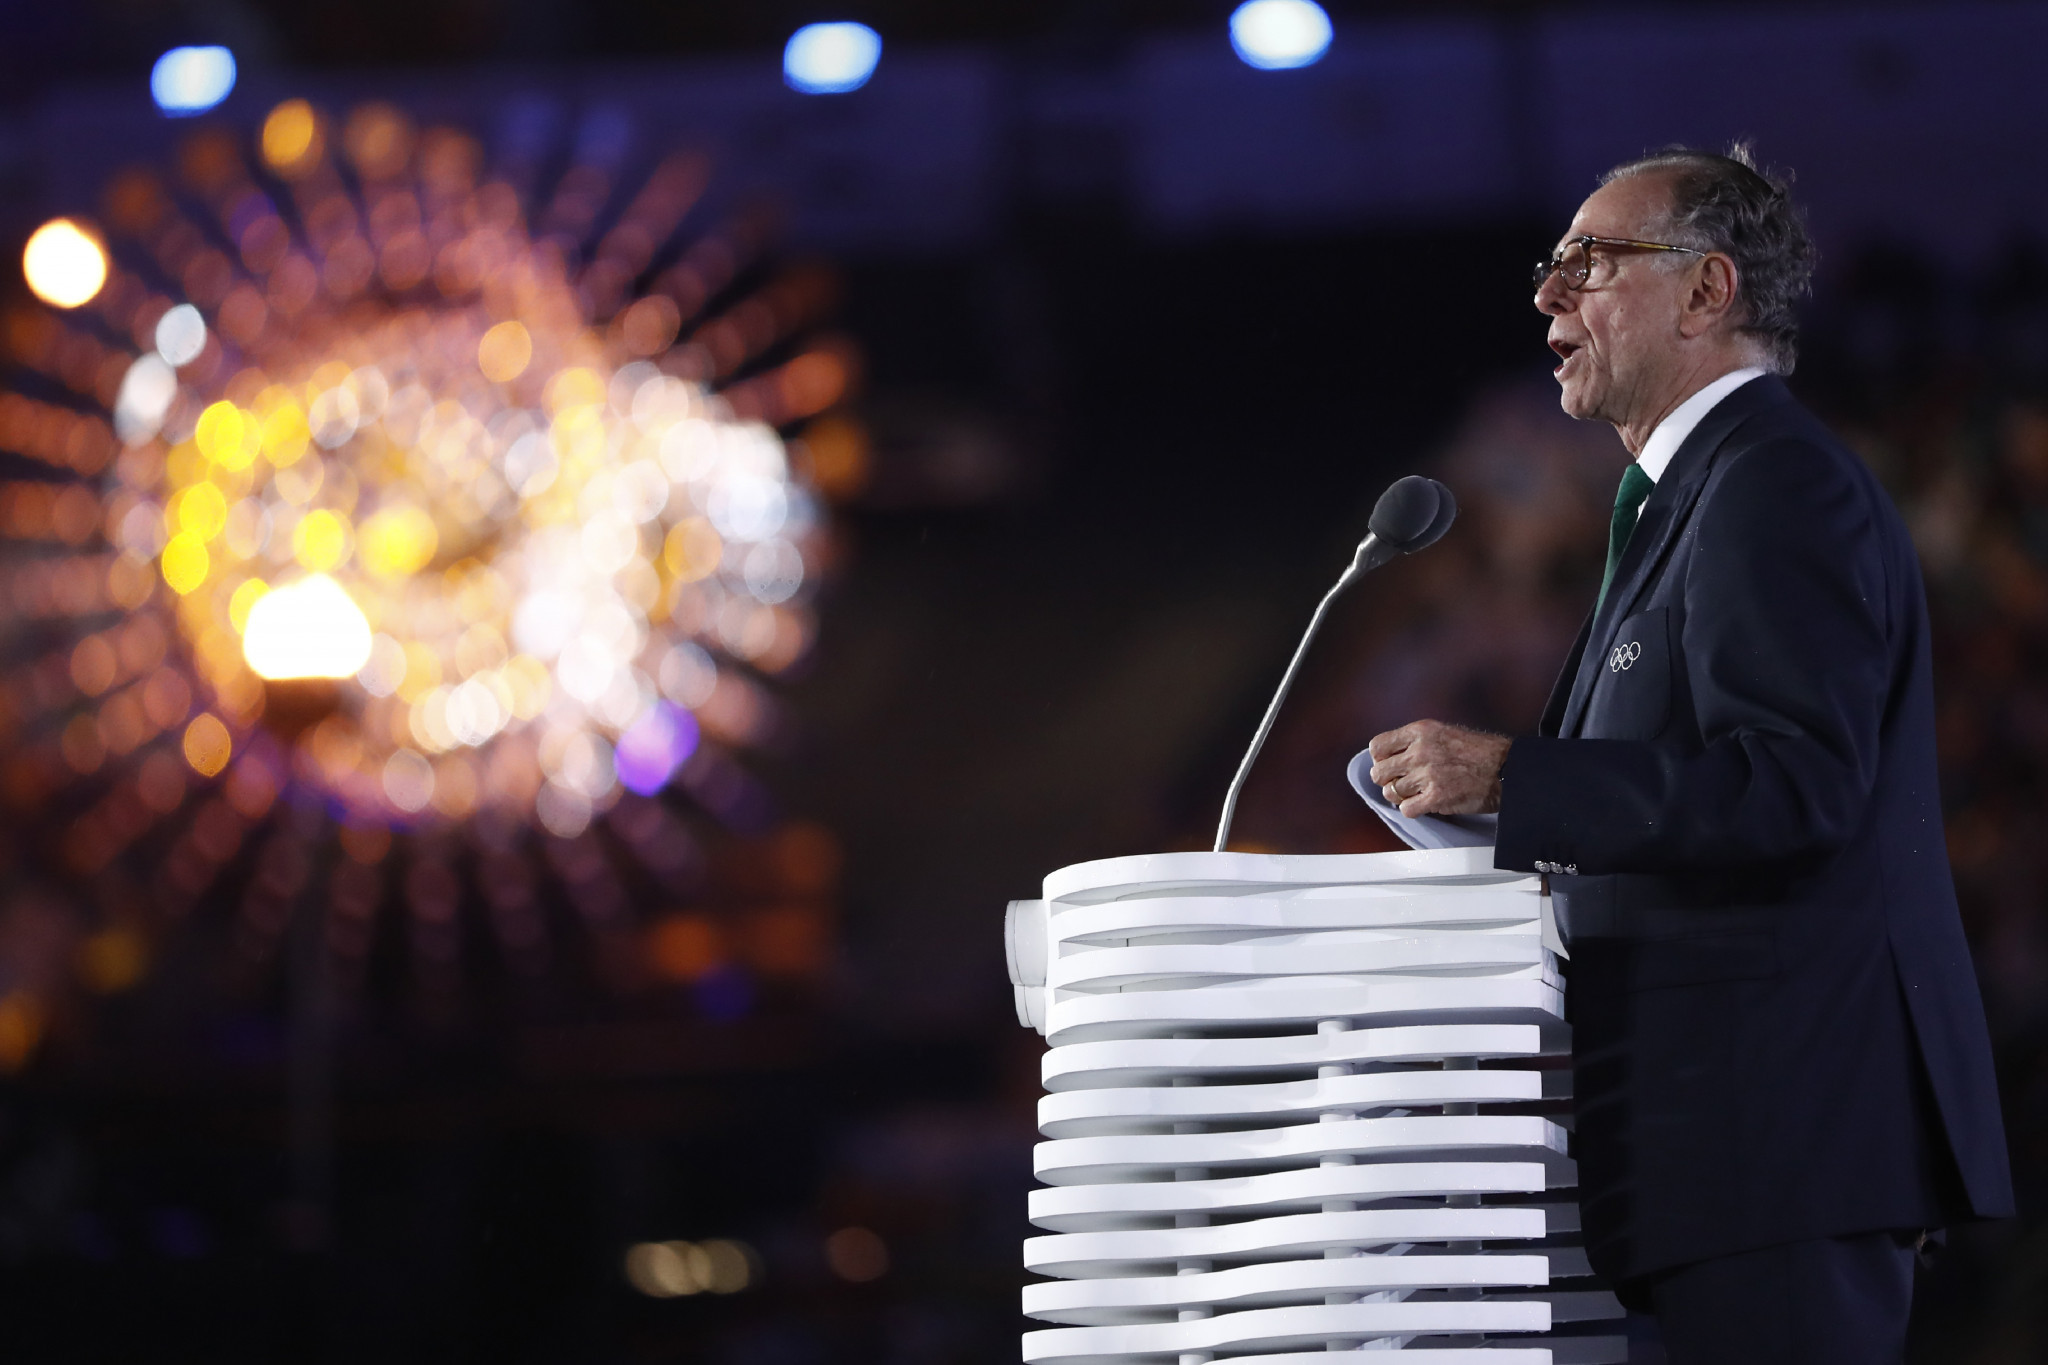 Carlos Nuzman pictured speaking at the Closing Ceremony of the Rio 2016 Olympic Games ©Getty Images